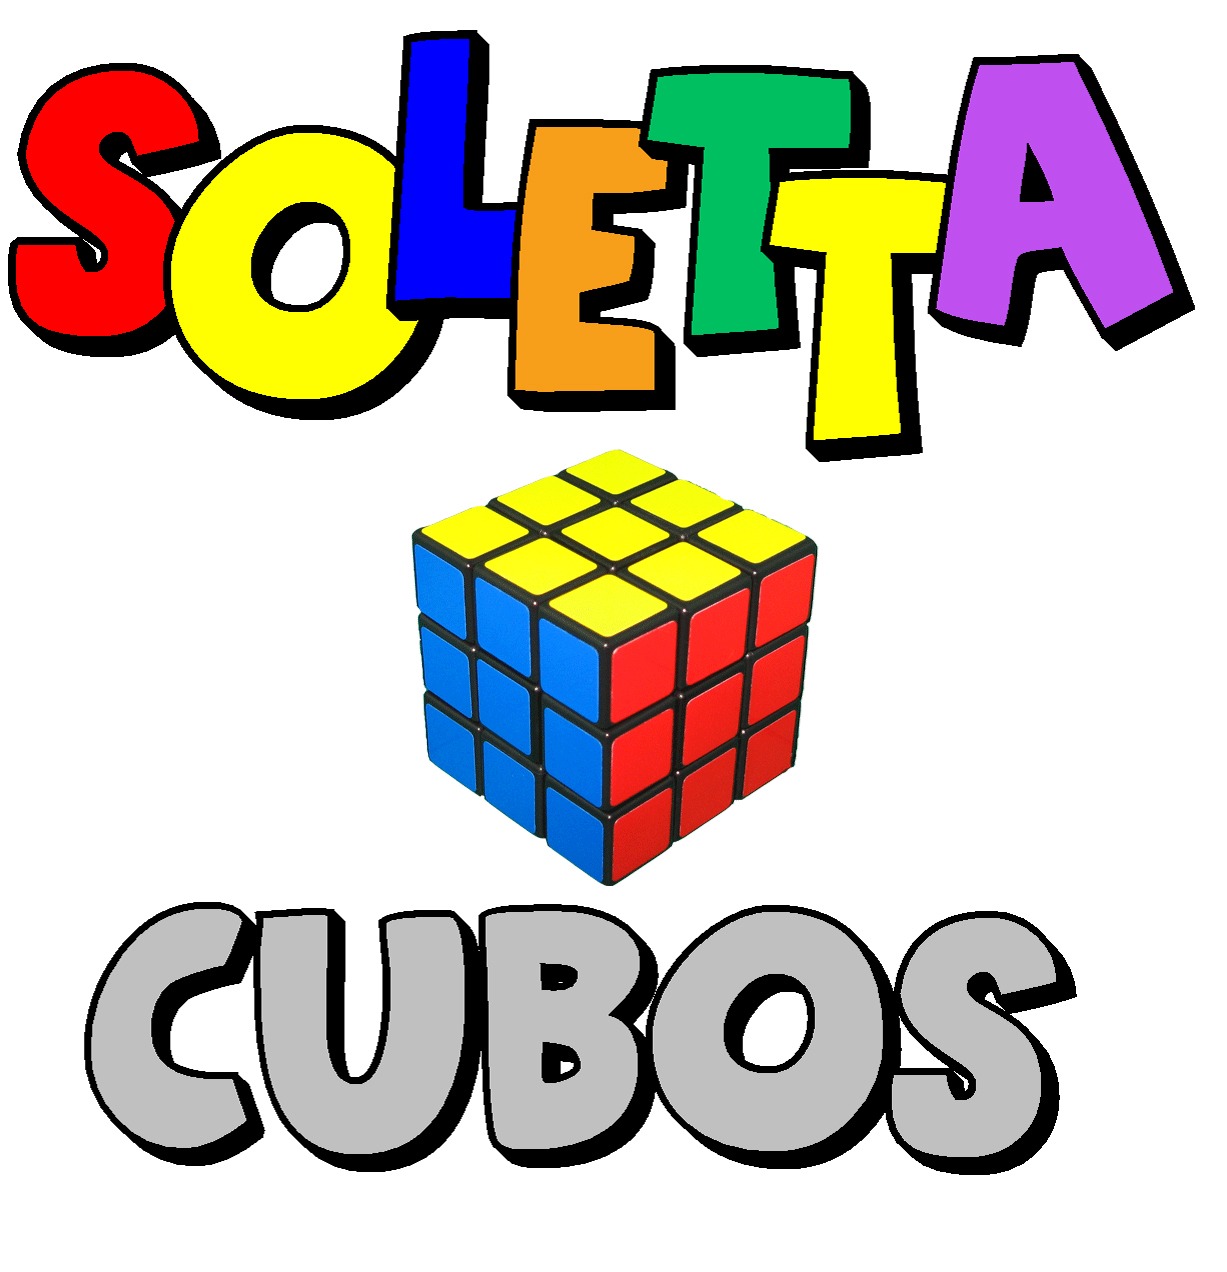 SOLETTACUBOS